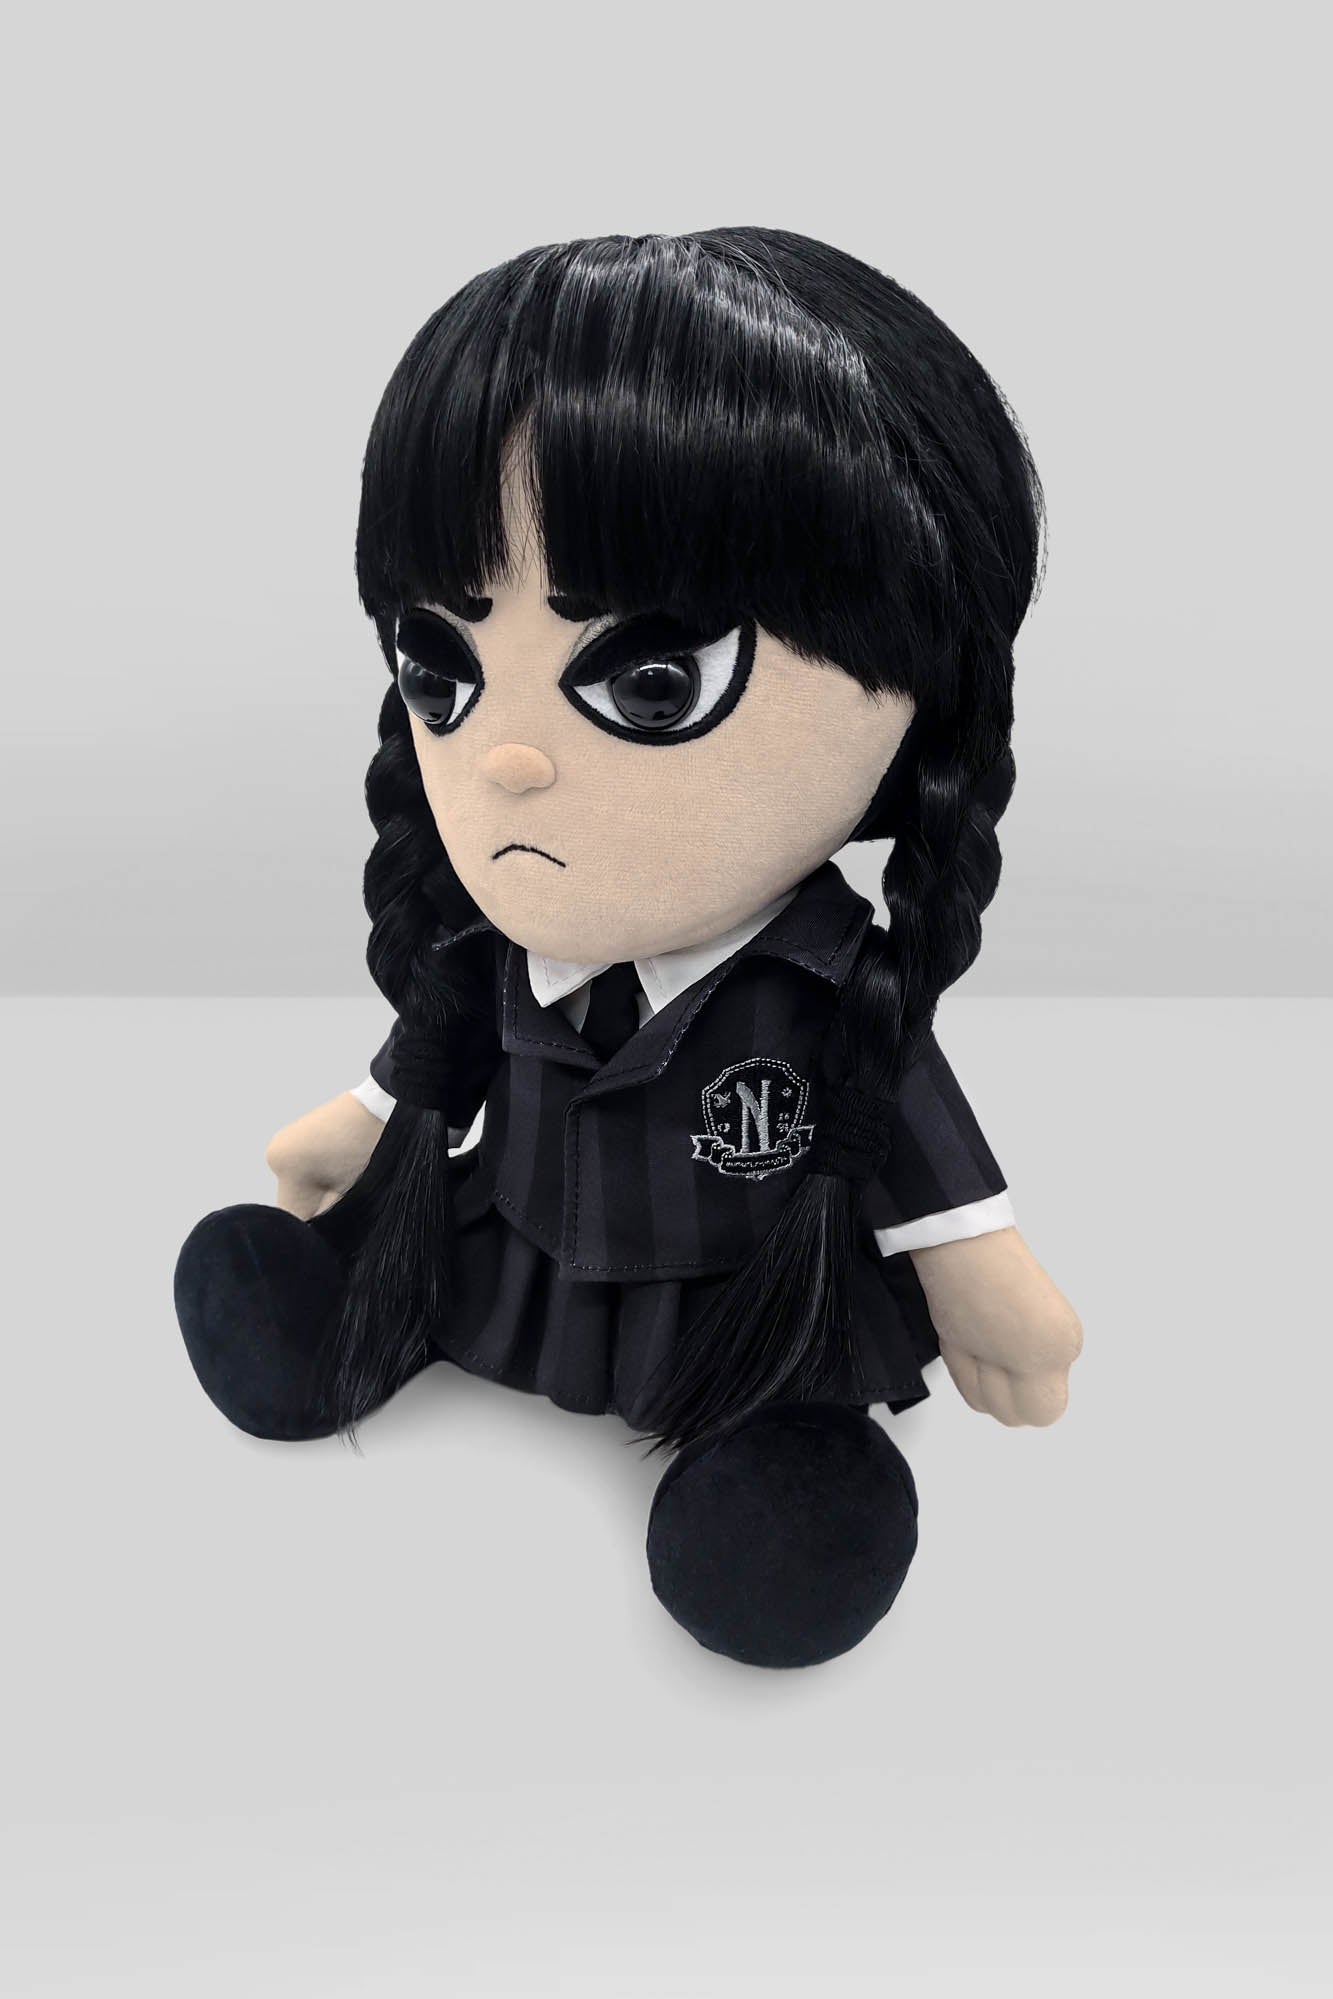 Addams family Wednesday Addams figurine. Hand painted. 8” Tall 3d Printed